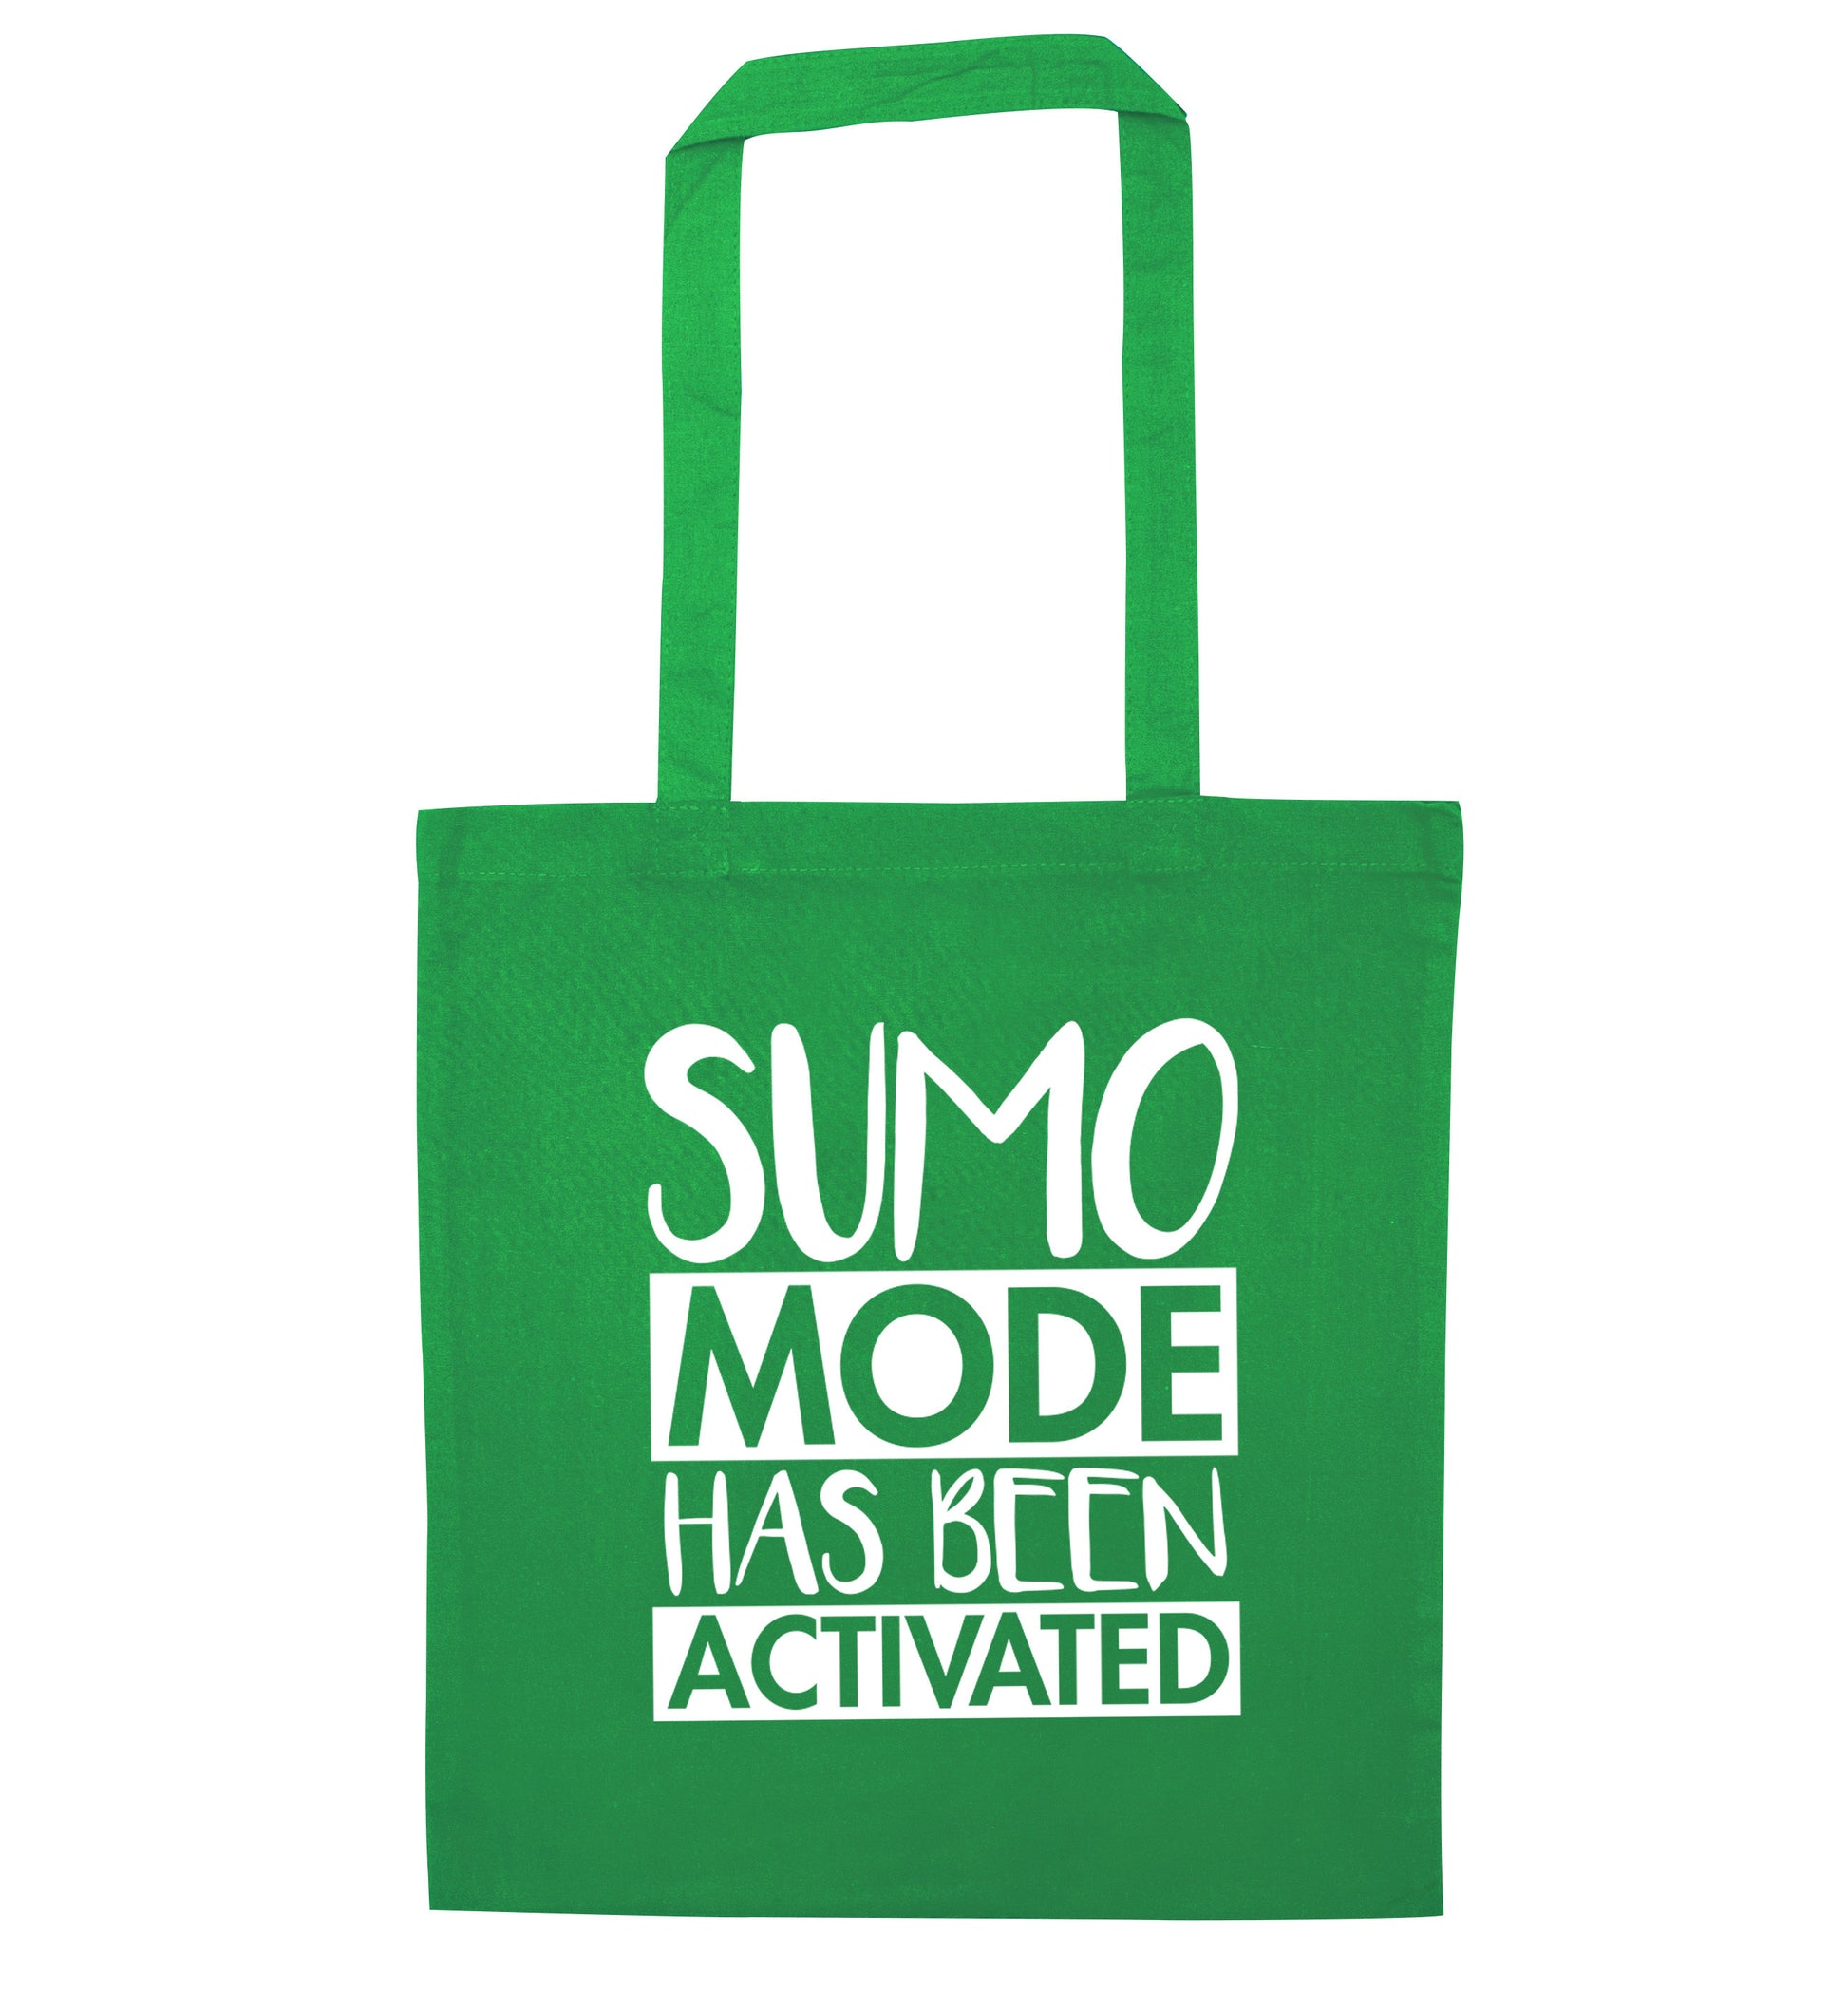 Sumo mode activated green tote bag